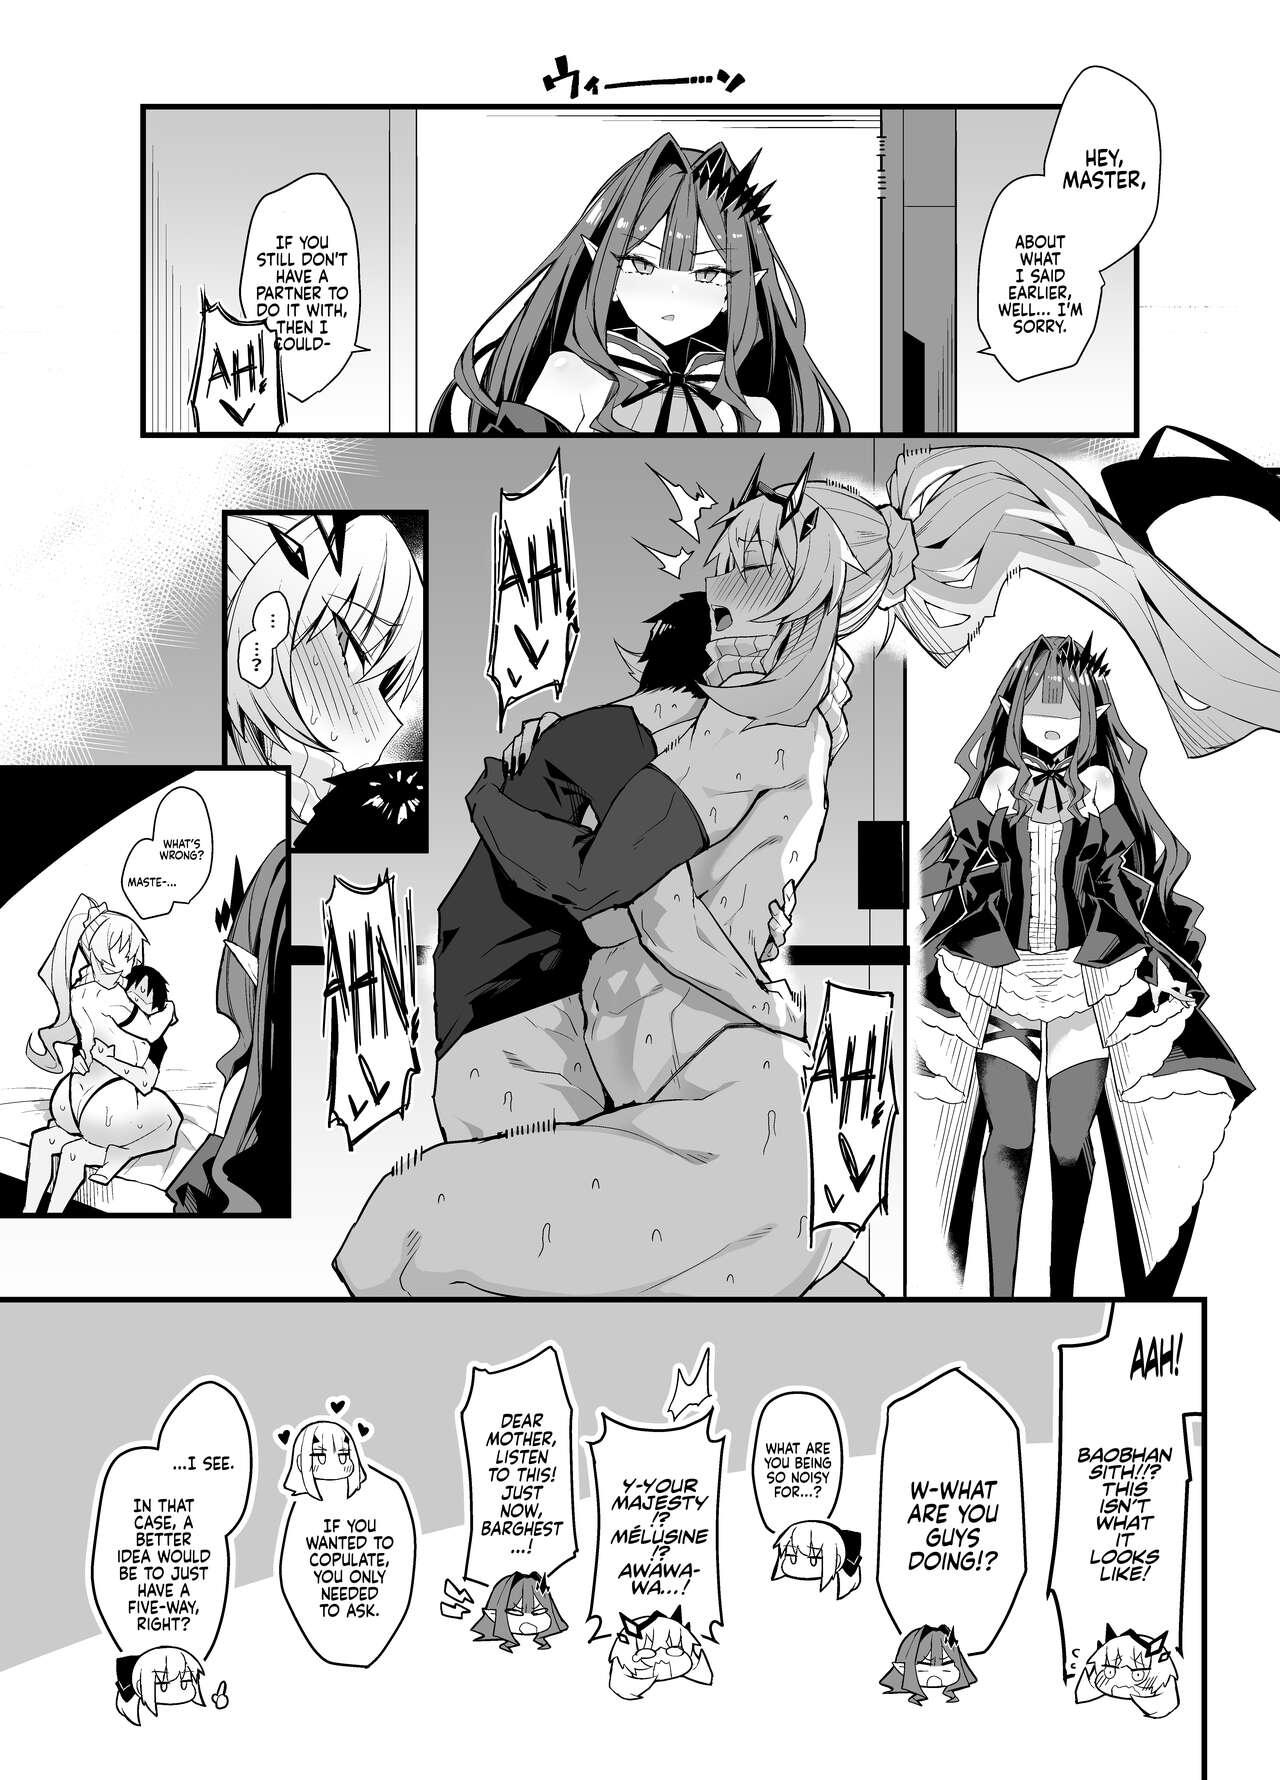 Assfucking Bageko to Asa made Ichaicha | Making out with Bageko Until Morning - Fate grand order Stripper - Page 7